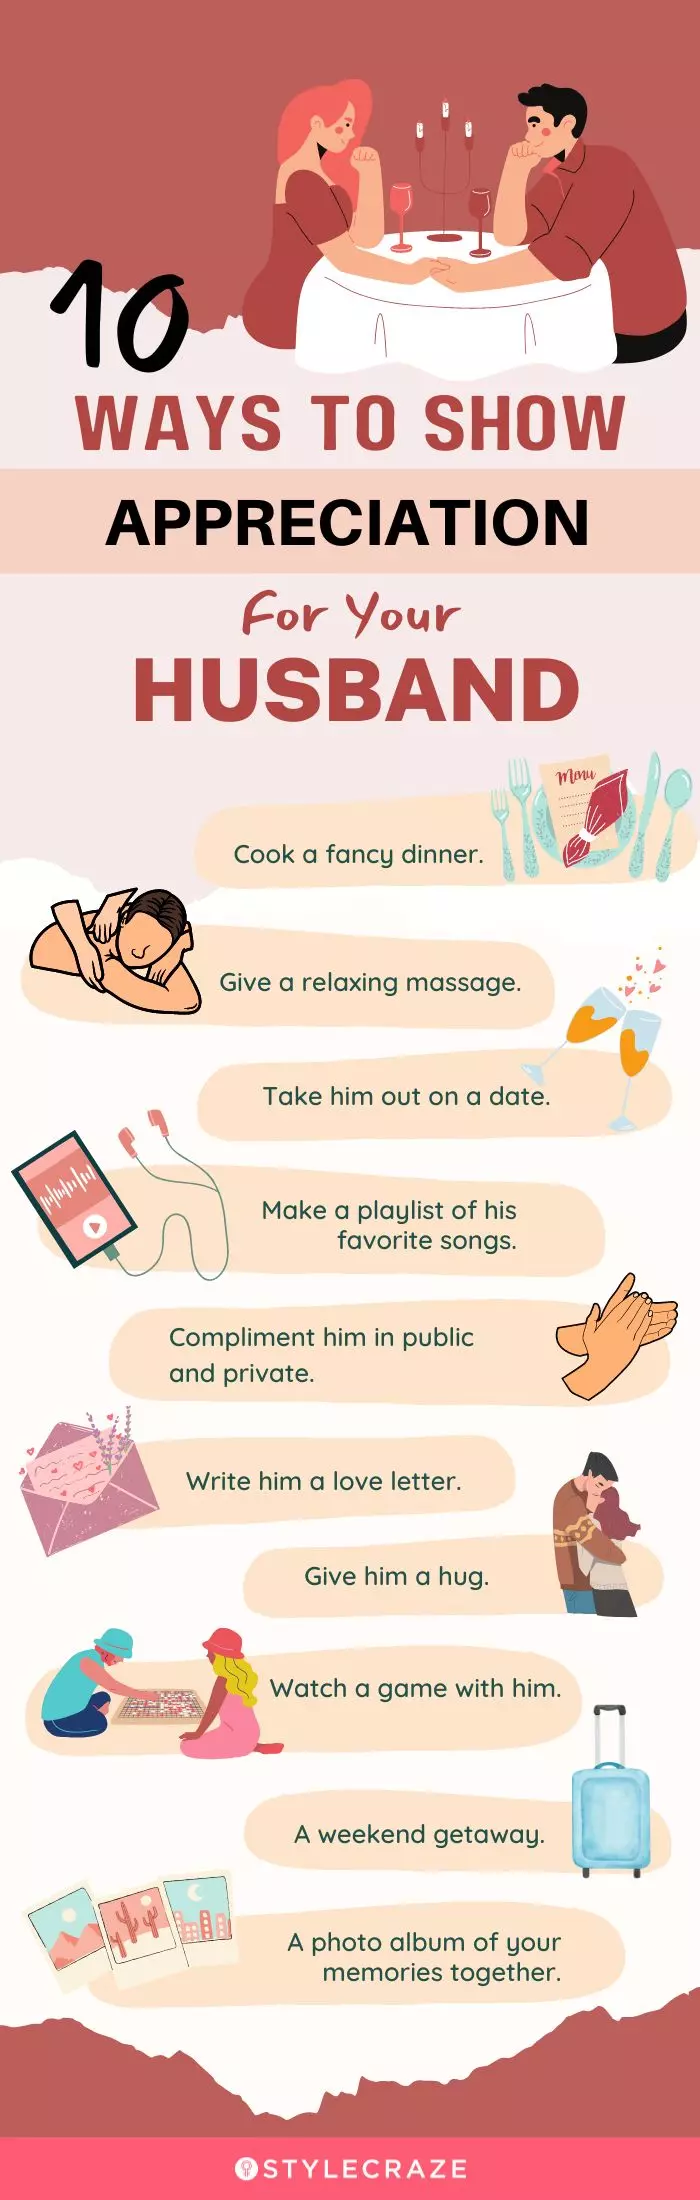 10 ways to show appreciation for your husband (infographic)